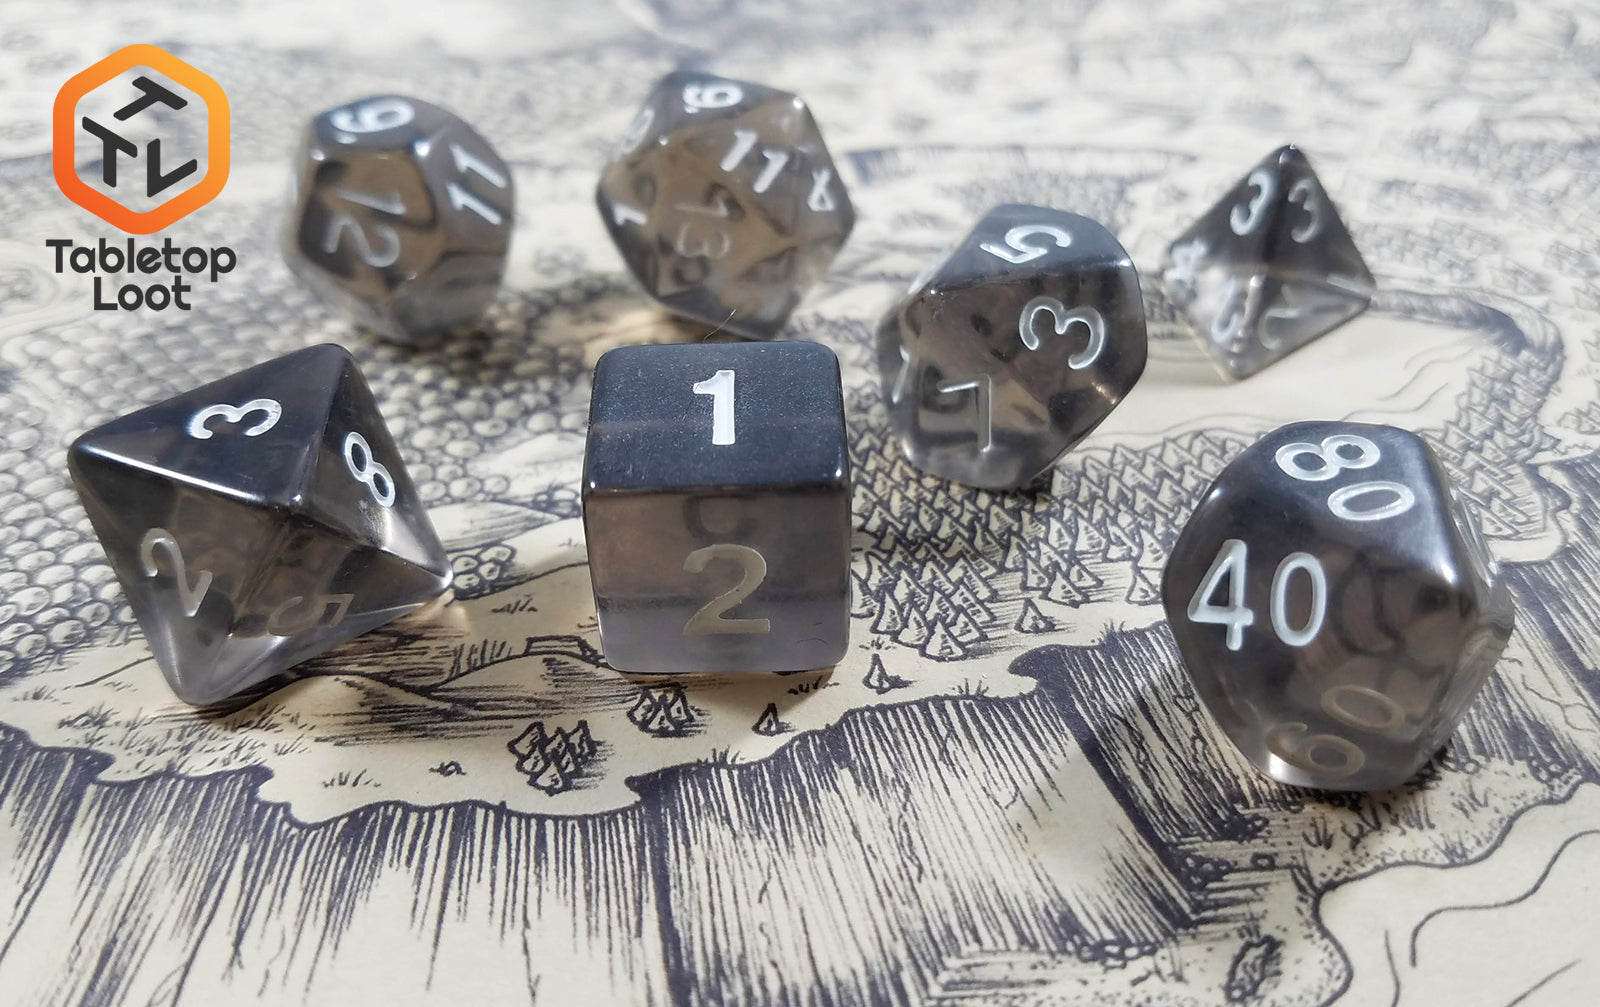 The Shadow Thrall 7 piece dice set from Tabletop Loot; grey tinted like smoky quartz with white numbering.